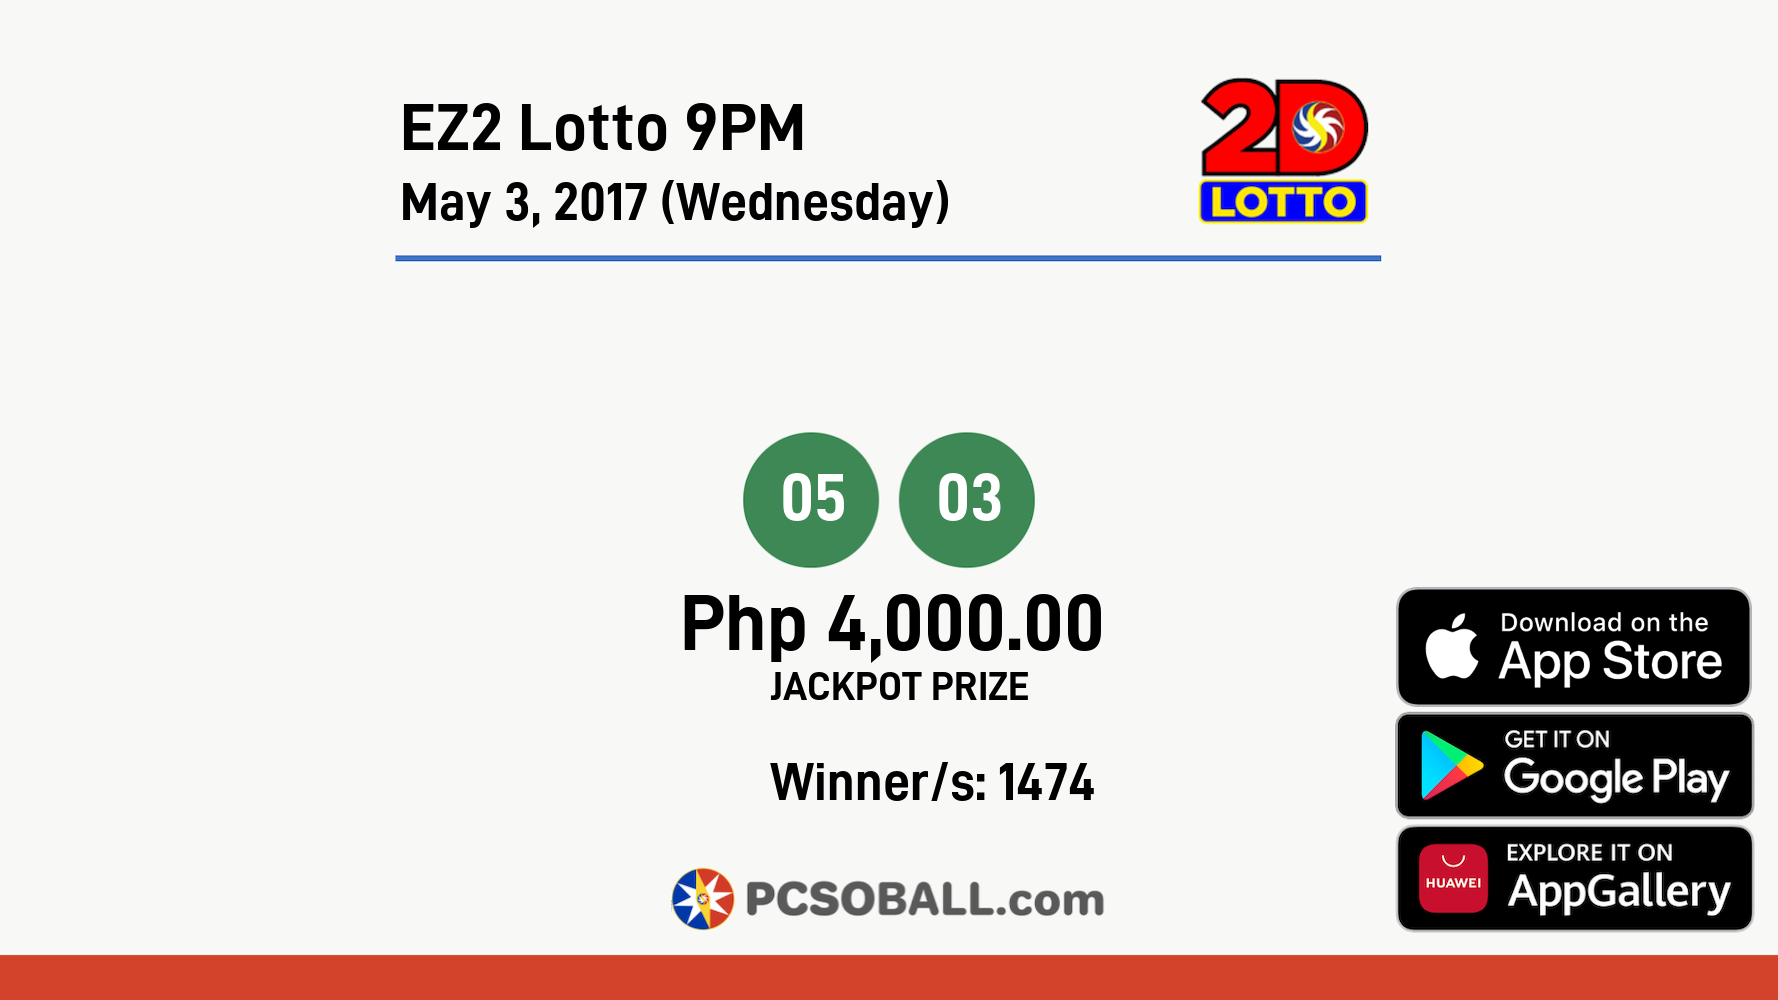 EZ2 Lotto 9PM May 3, 2017 (Wednesday) Result